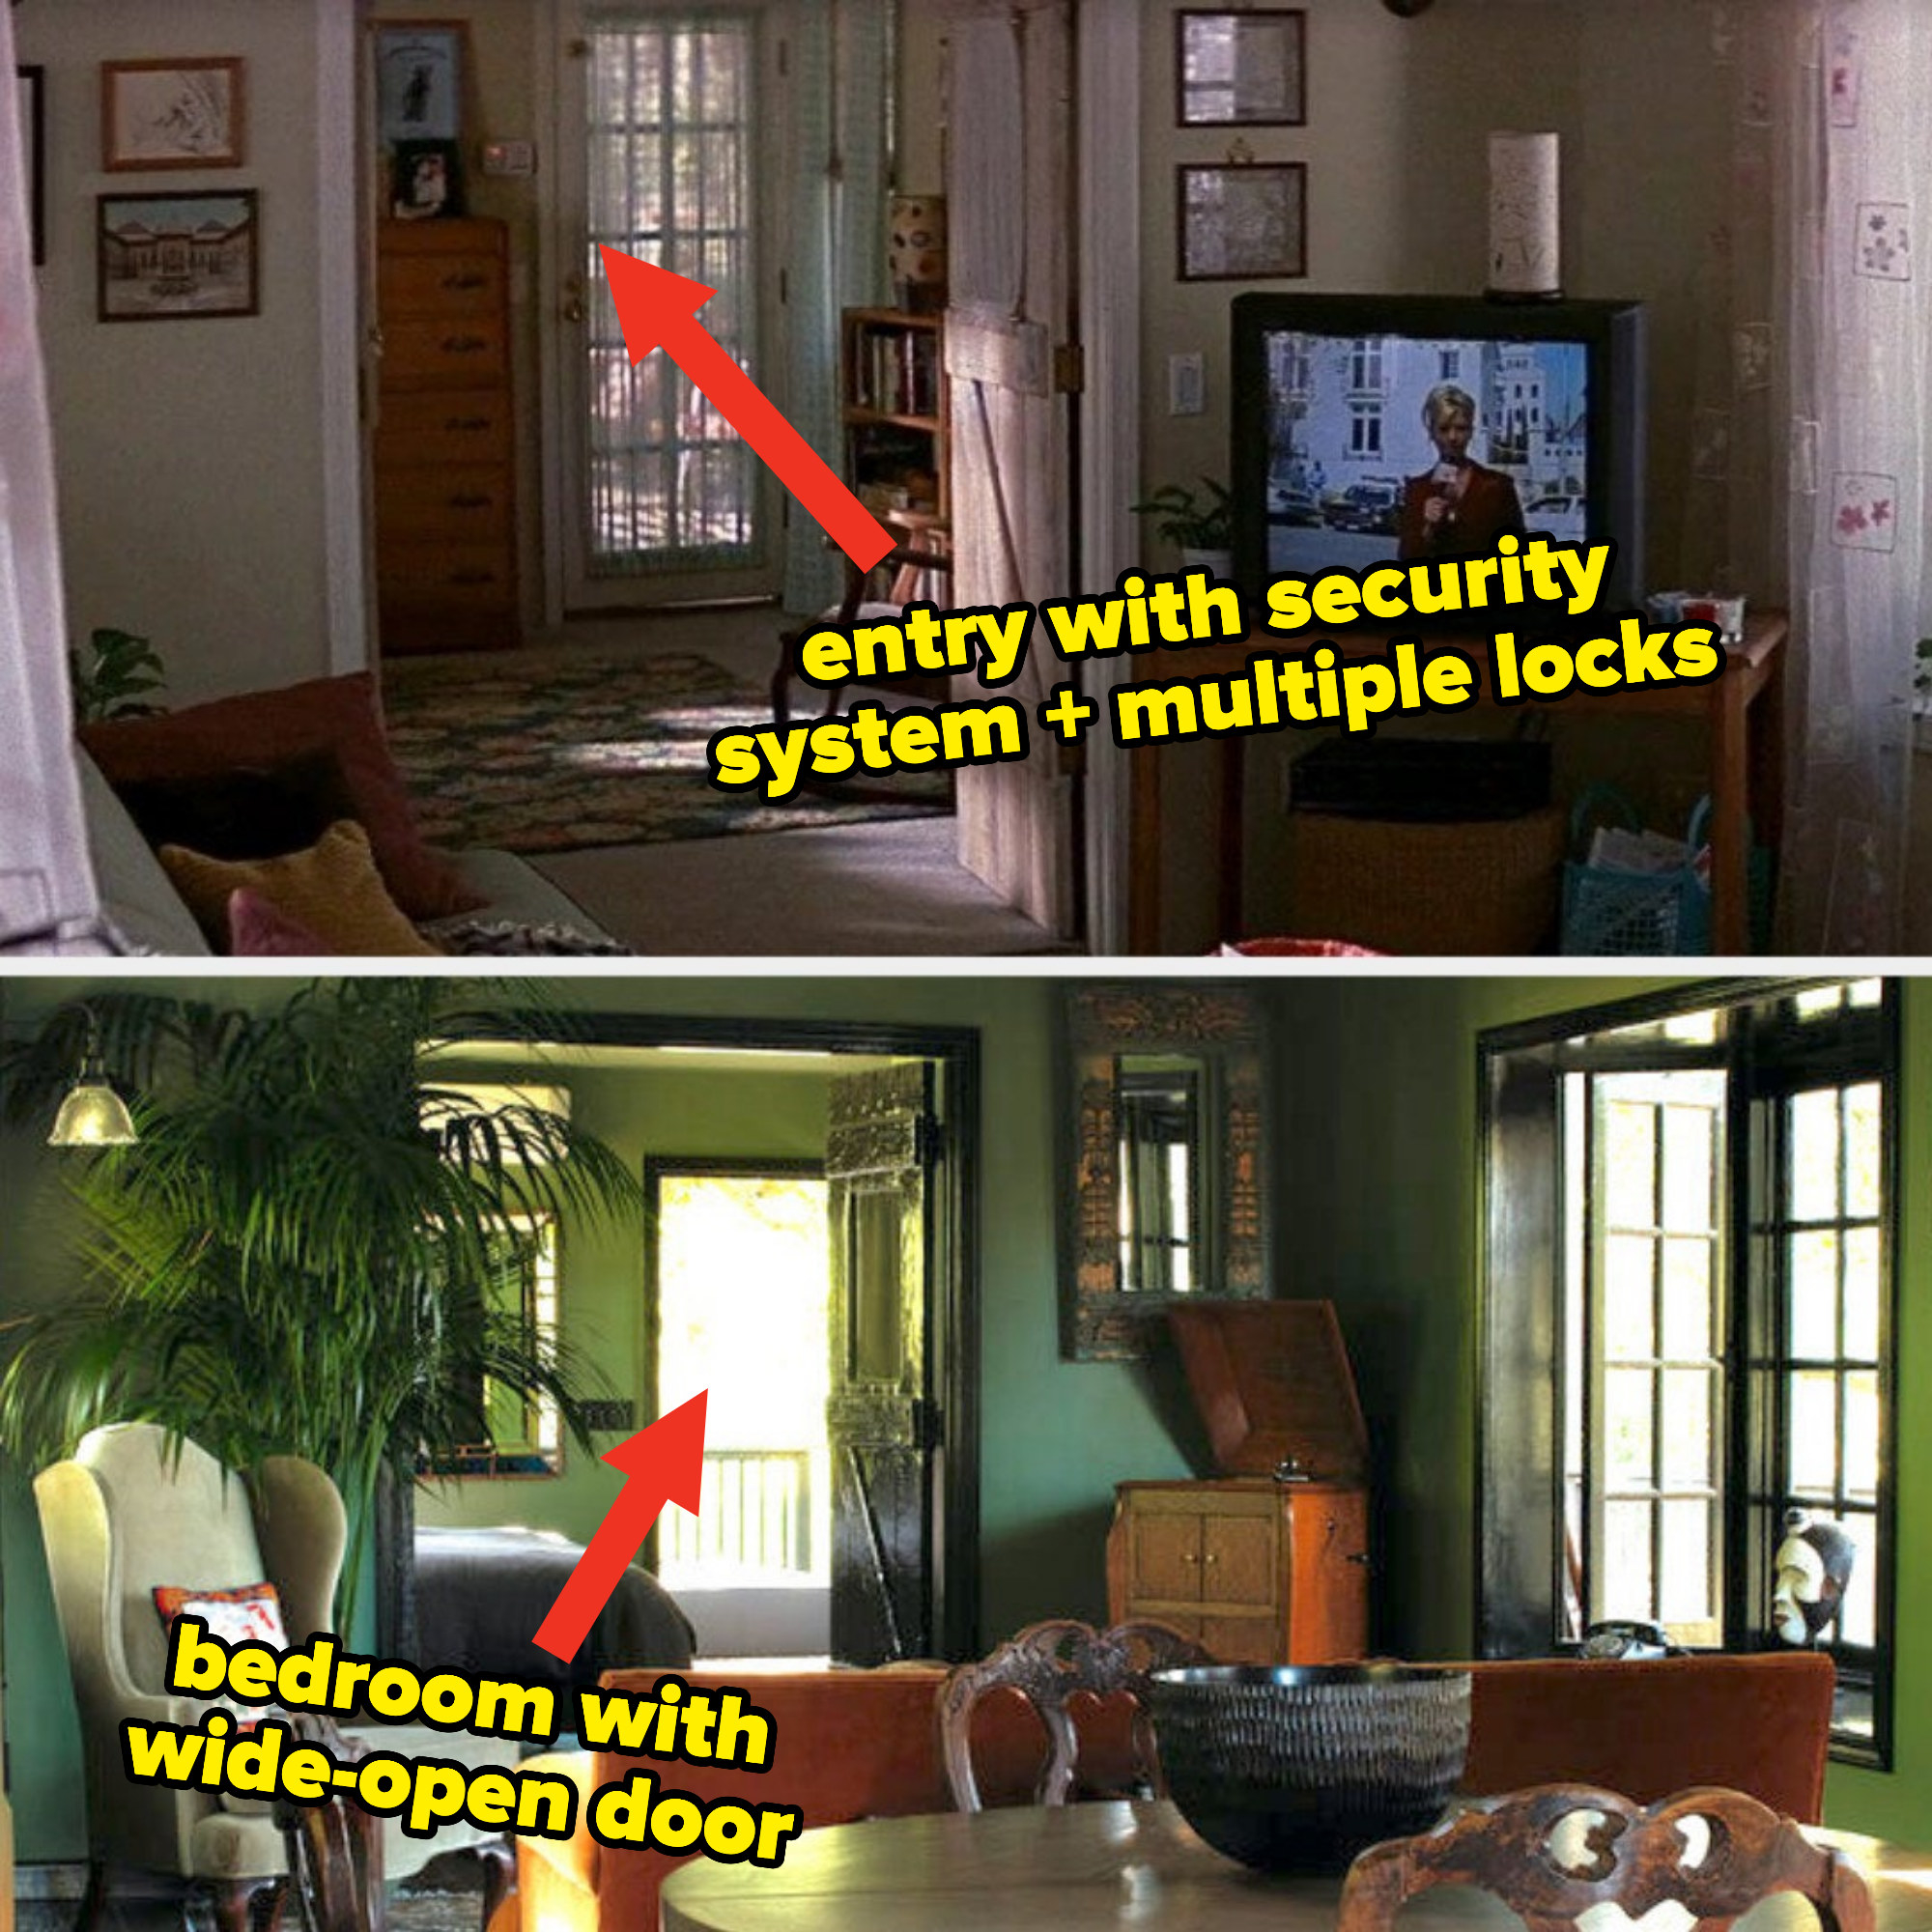 arrow pointing to the door in scream 3 closed with locks and the door being wide open in the newly-renovated version, with a bed in that room